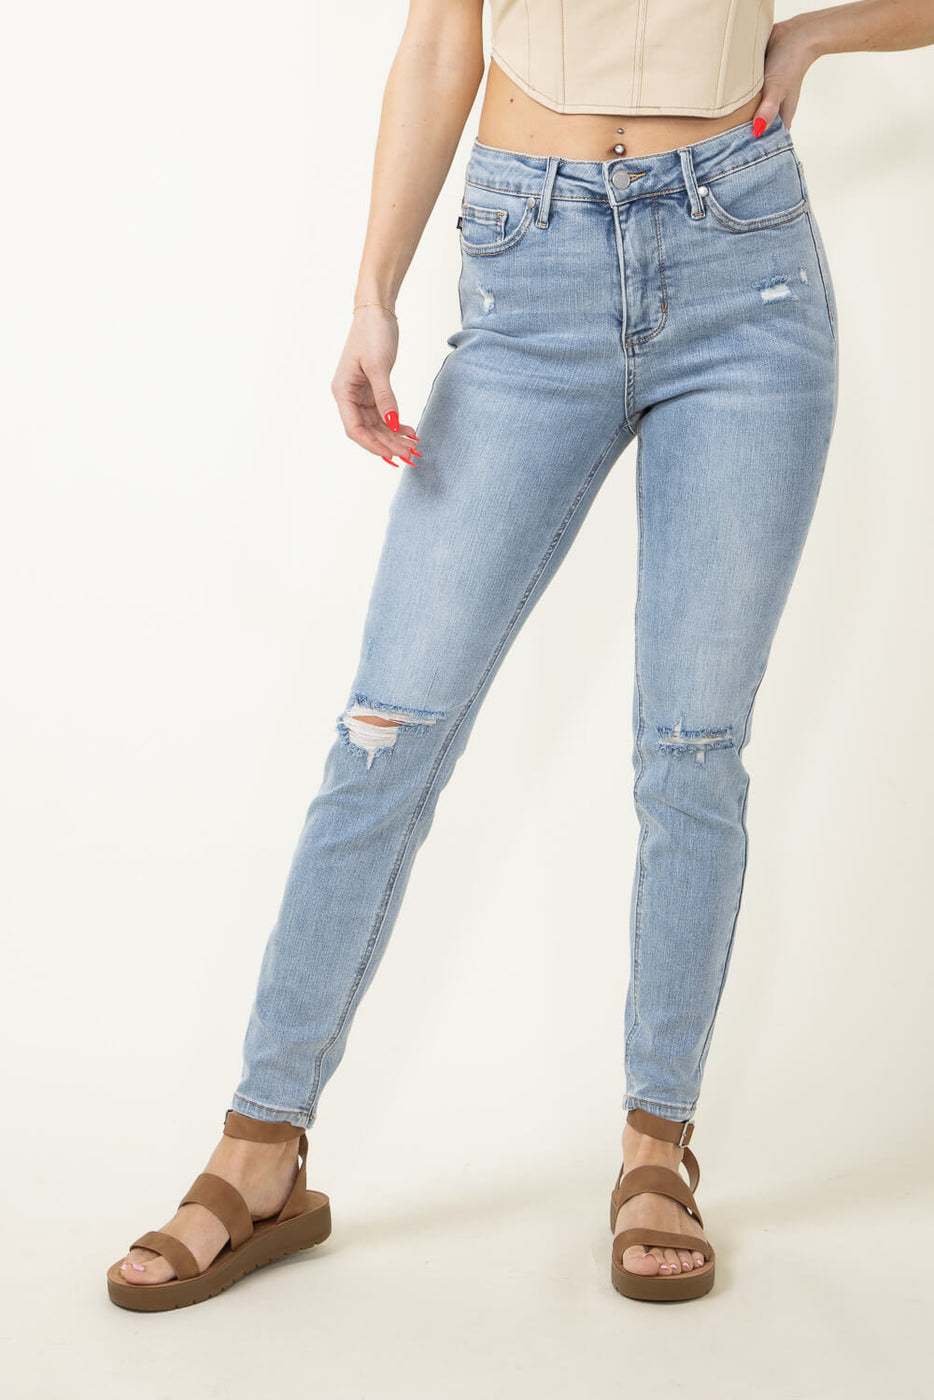 Judy Blue High Rise Tummy Control Skinny Jeans for Women in